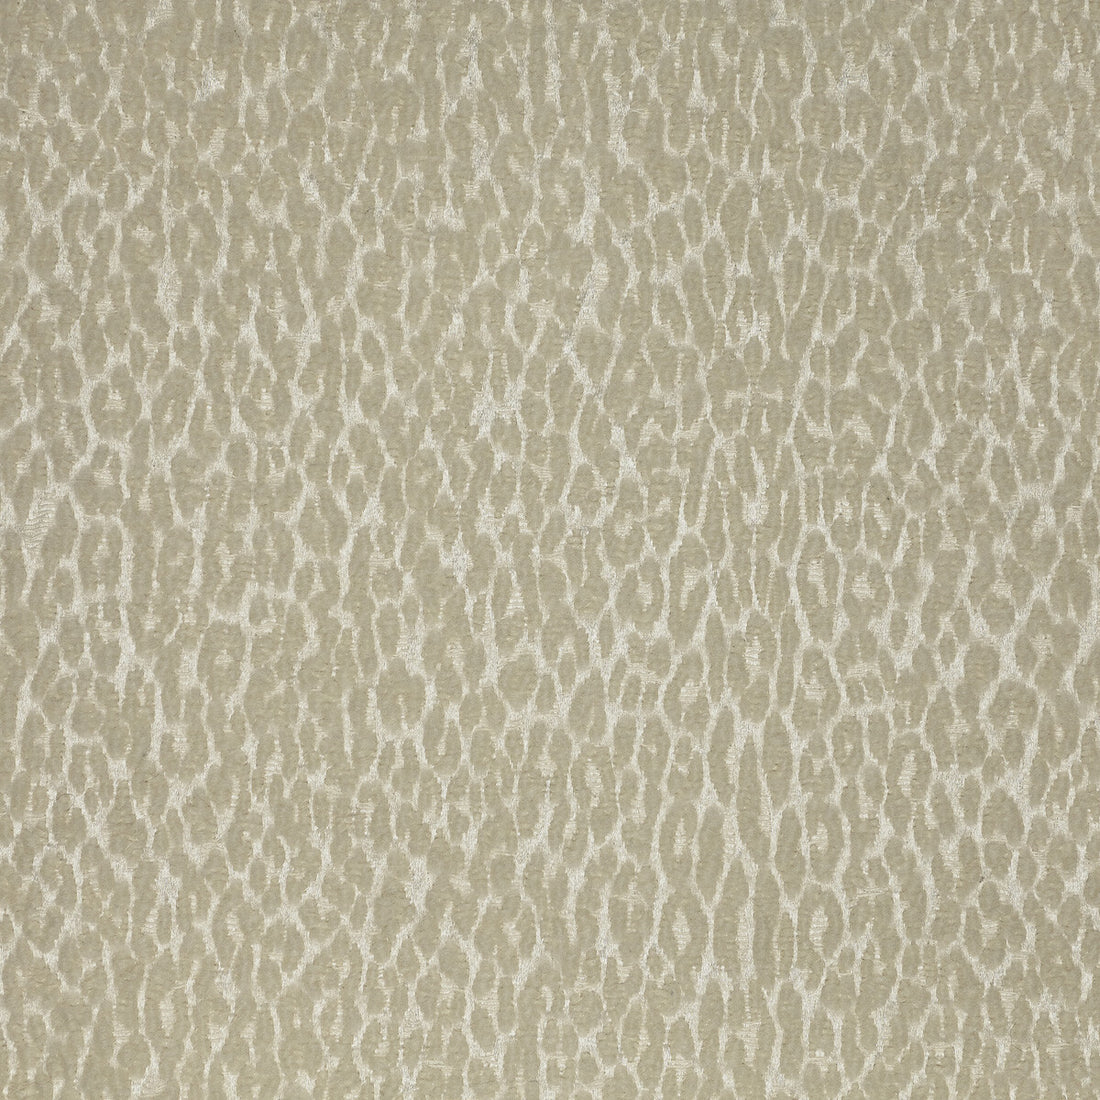 Magma fabric in 7 color - pattern LZ-30394.07.0 - by Kravet Design in the Lizzo collection